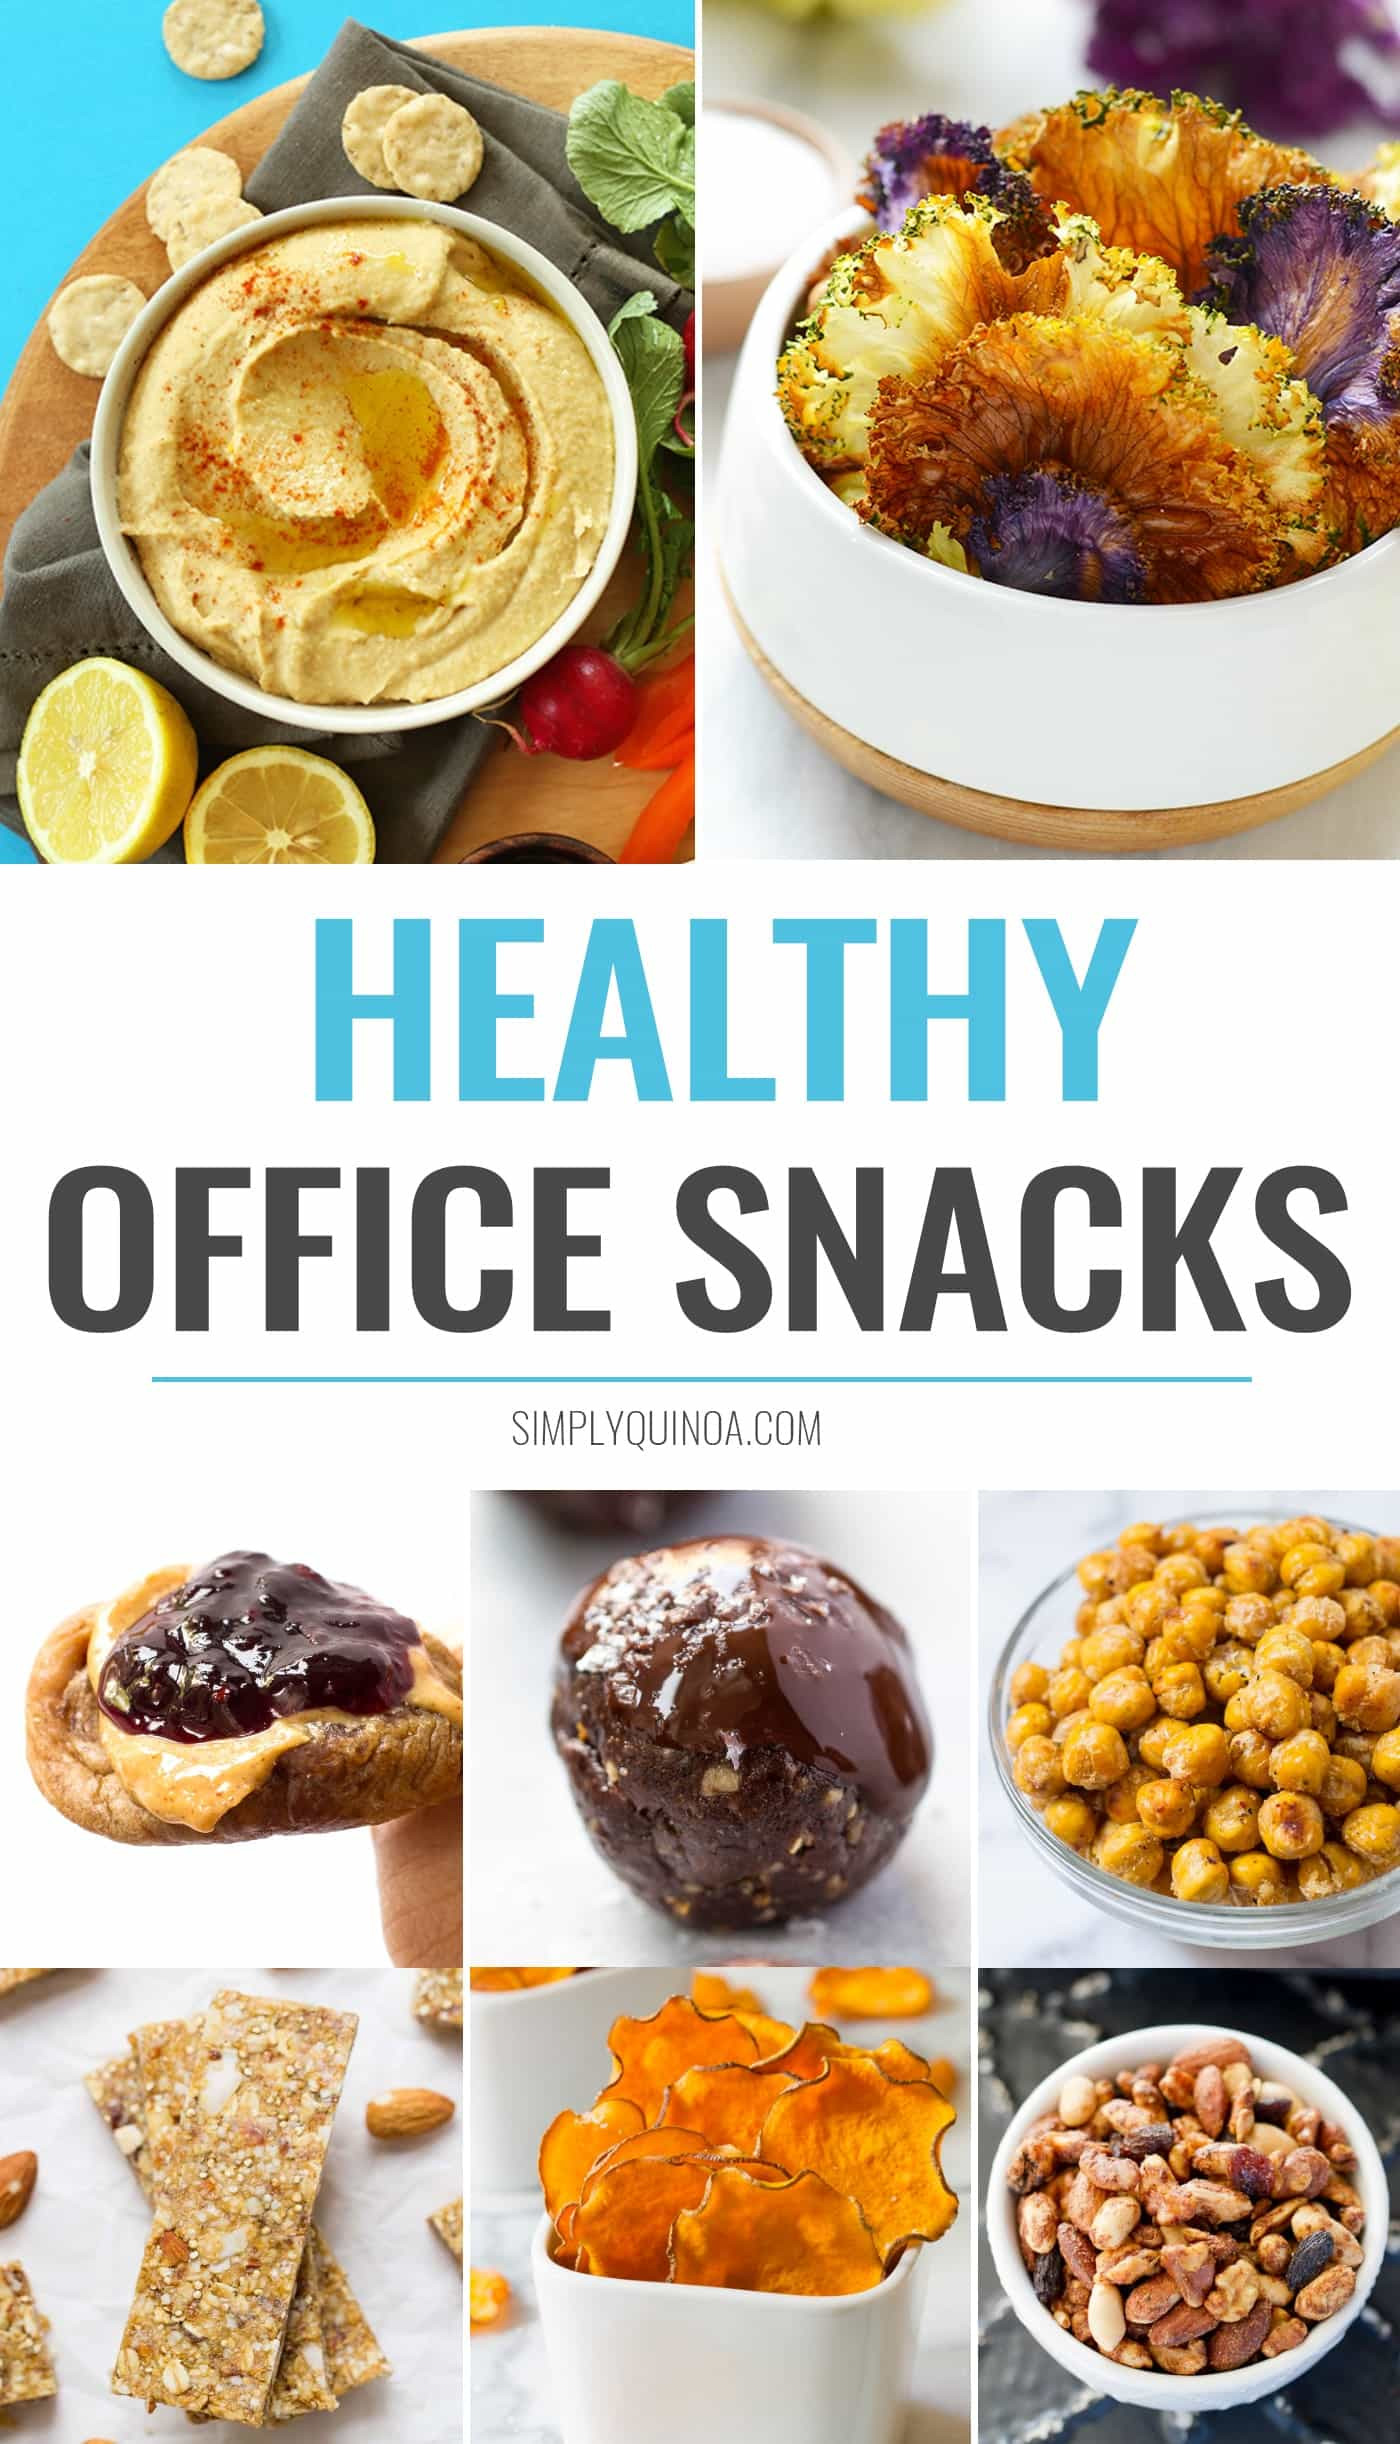 Healthy Snacks For Office
 The 12 Best Healthy fice Snacks Simply Quinoa